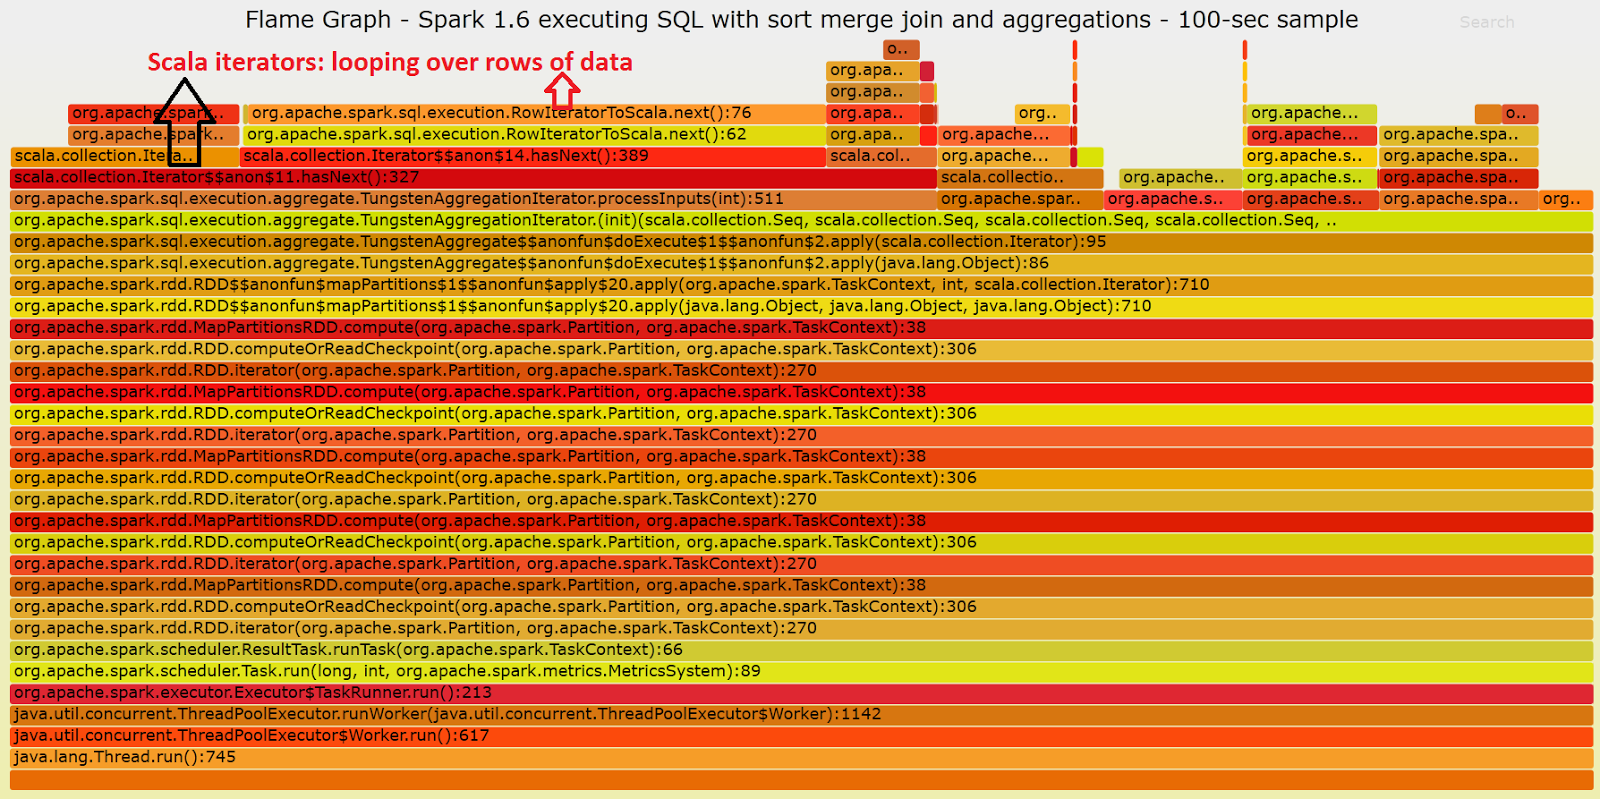 flamegraph_spark16_blog_wholestagecodegeneration_annotated